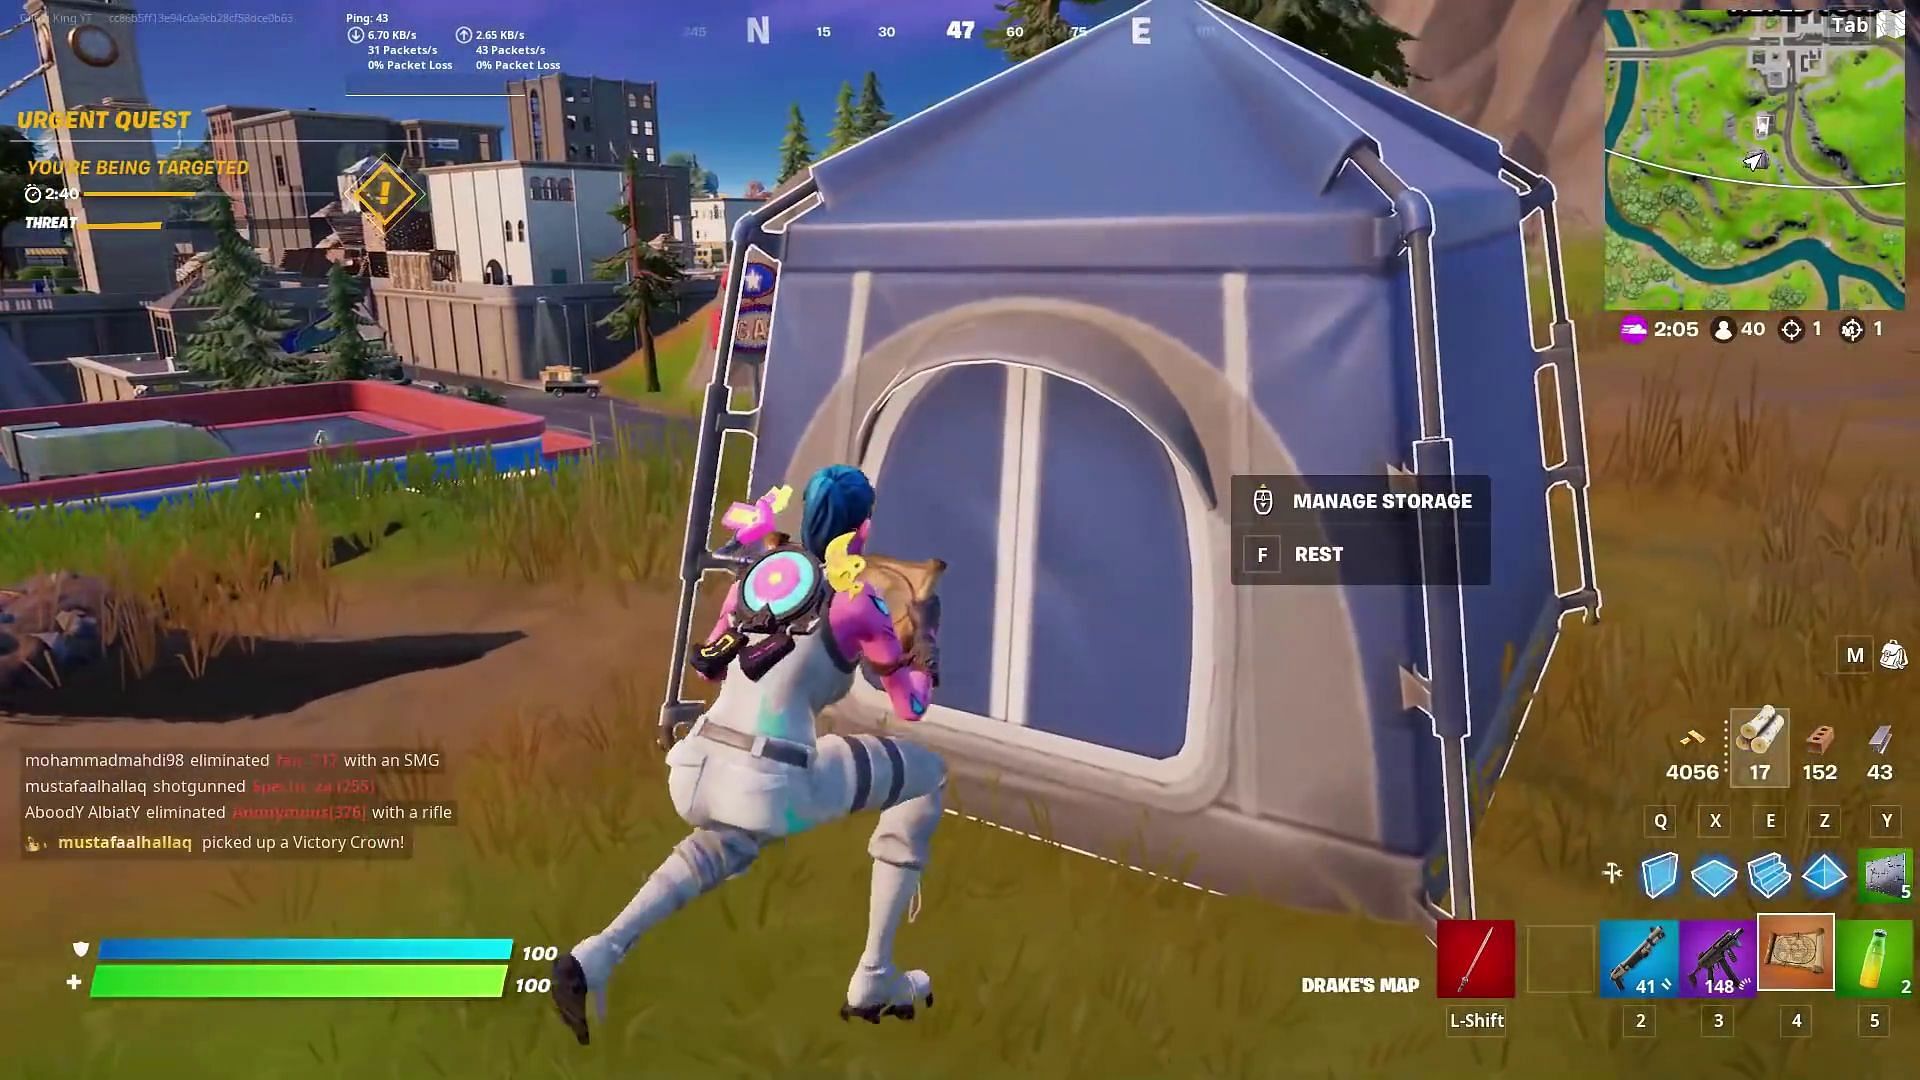 Loopers must stash the map before opening the chest (Image via GKIYouTube)